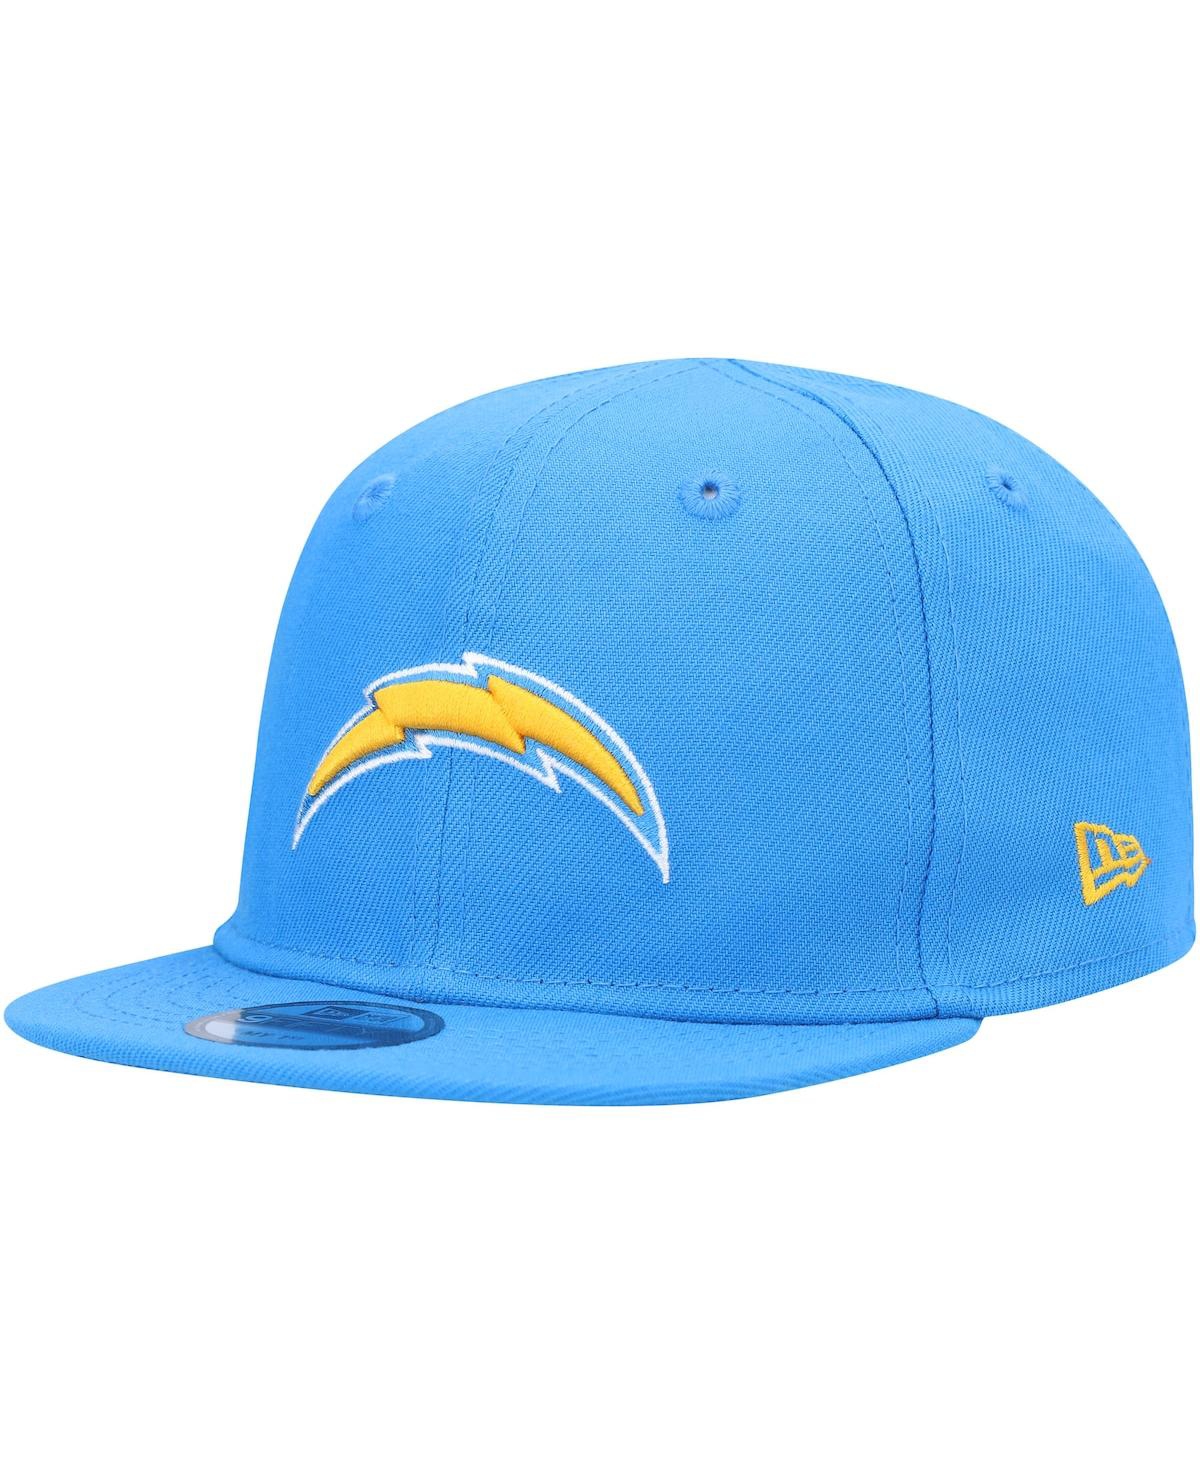 New Era Babies' Infant Boys And Girls  Powder Blue Los Angeles Chargers My 1st 9fifty Snapback Hat